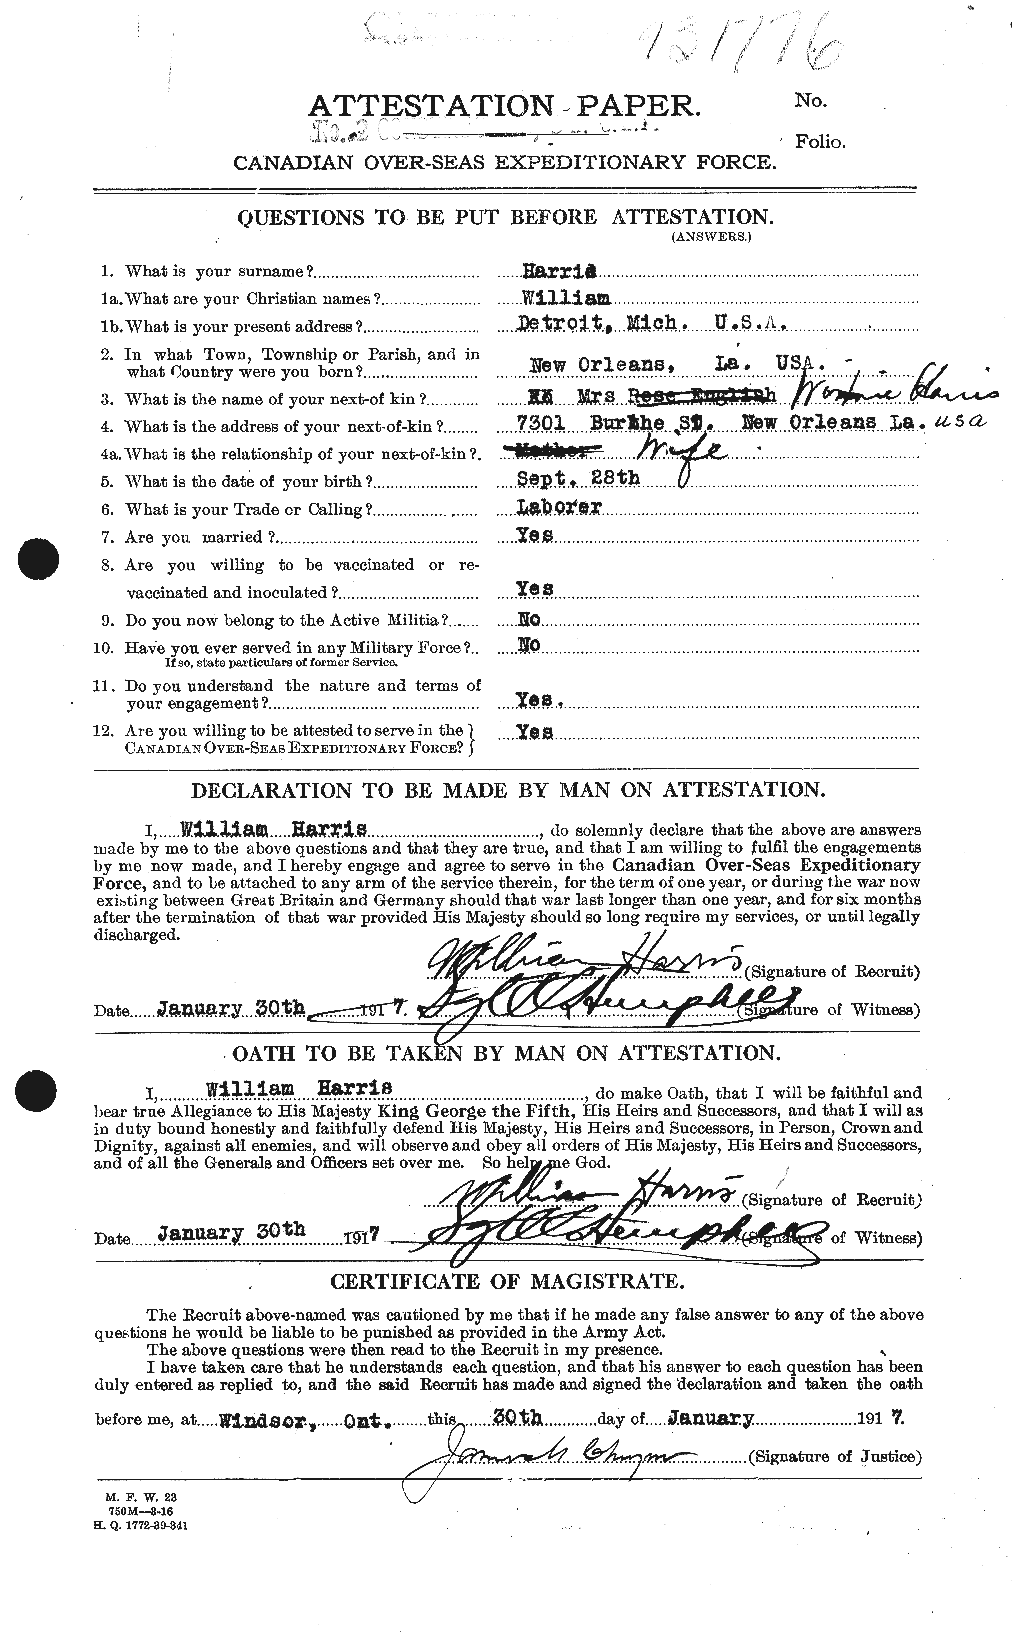 Personnel Records of the First World War - CEF 378306a